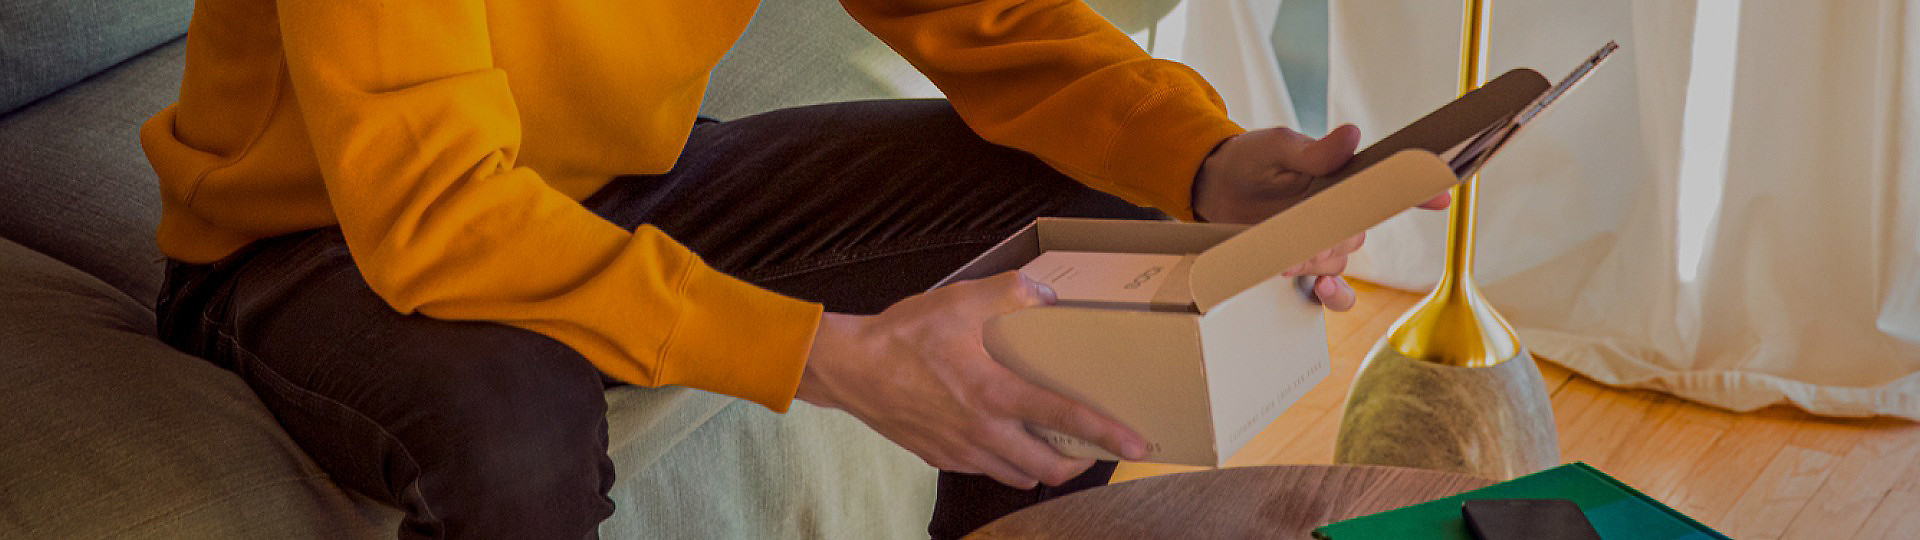 A close-up of a person unboxing their IQOS ILUMA device